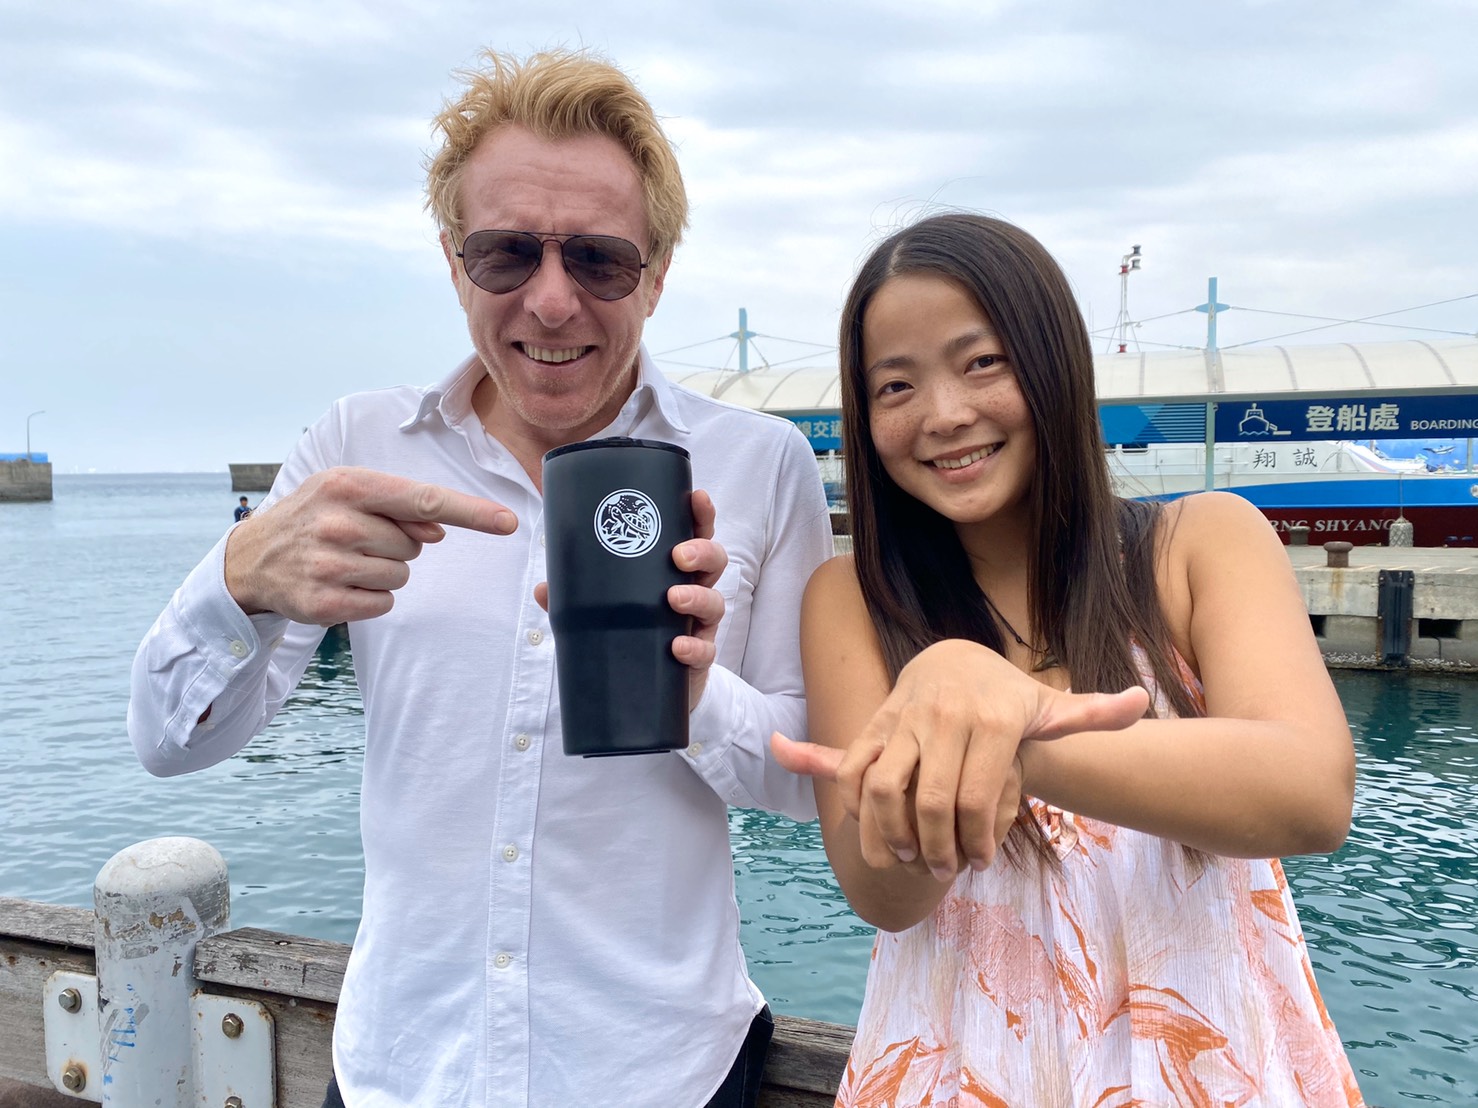 TV host Jérôme Pitorin happily took a photo with Lynn Mo upon receiving a mug from Legend of Liuqiu as a gift. (Photo courtesy: Lynn Mo)